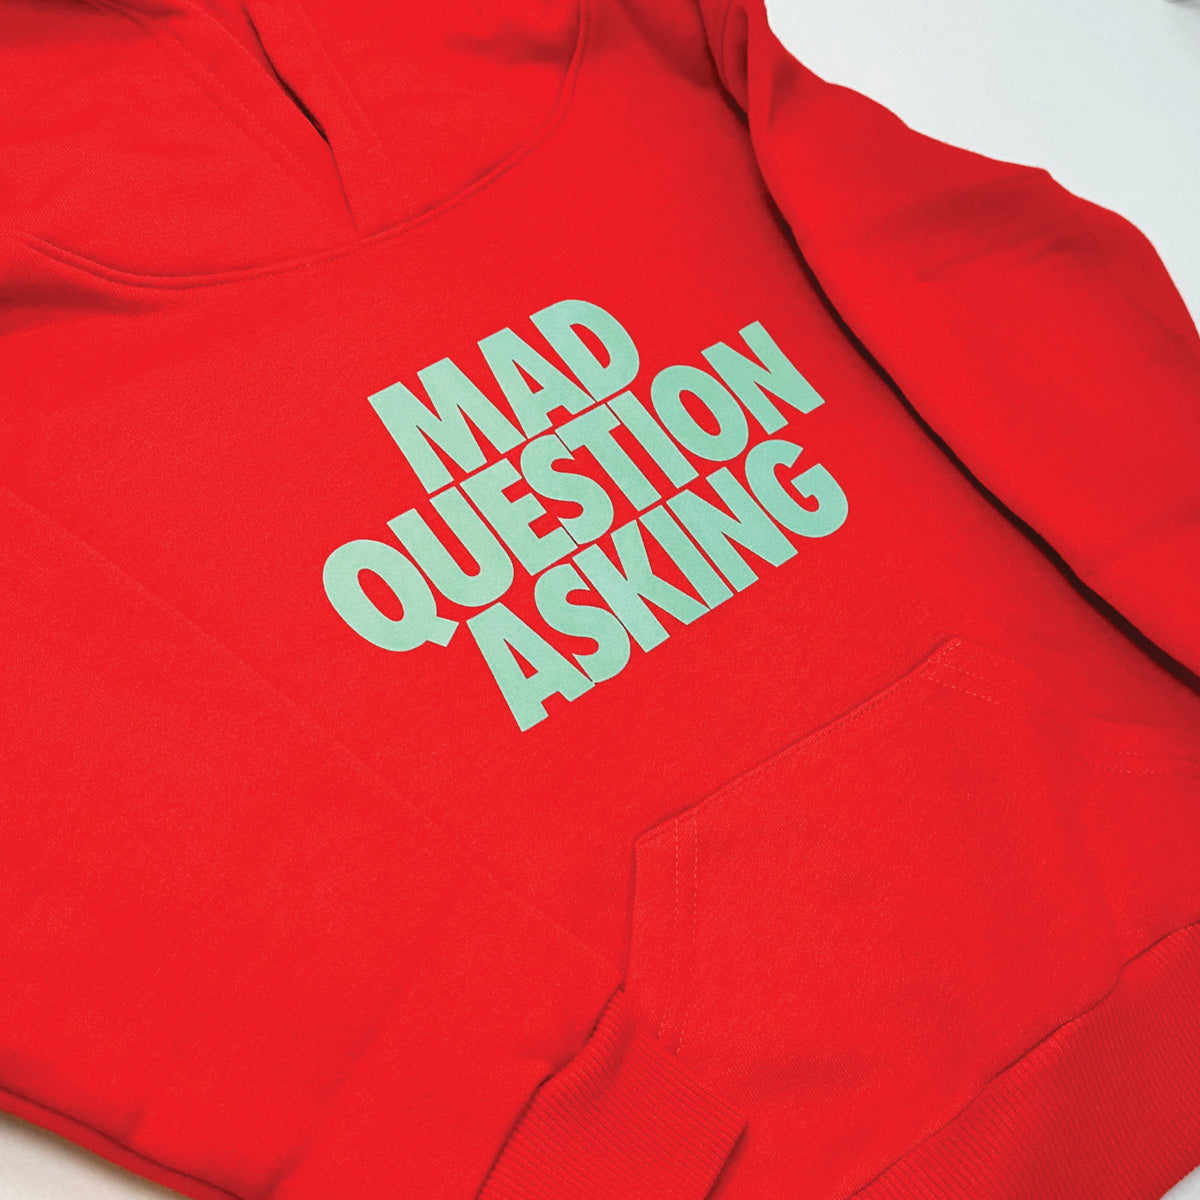 Mad Question Asking Hoodie (Red / Tiff)